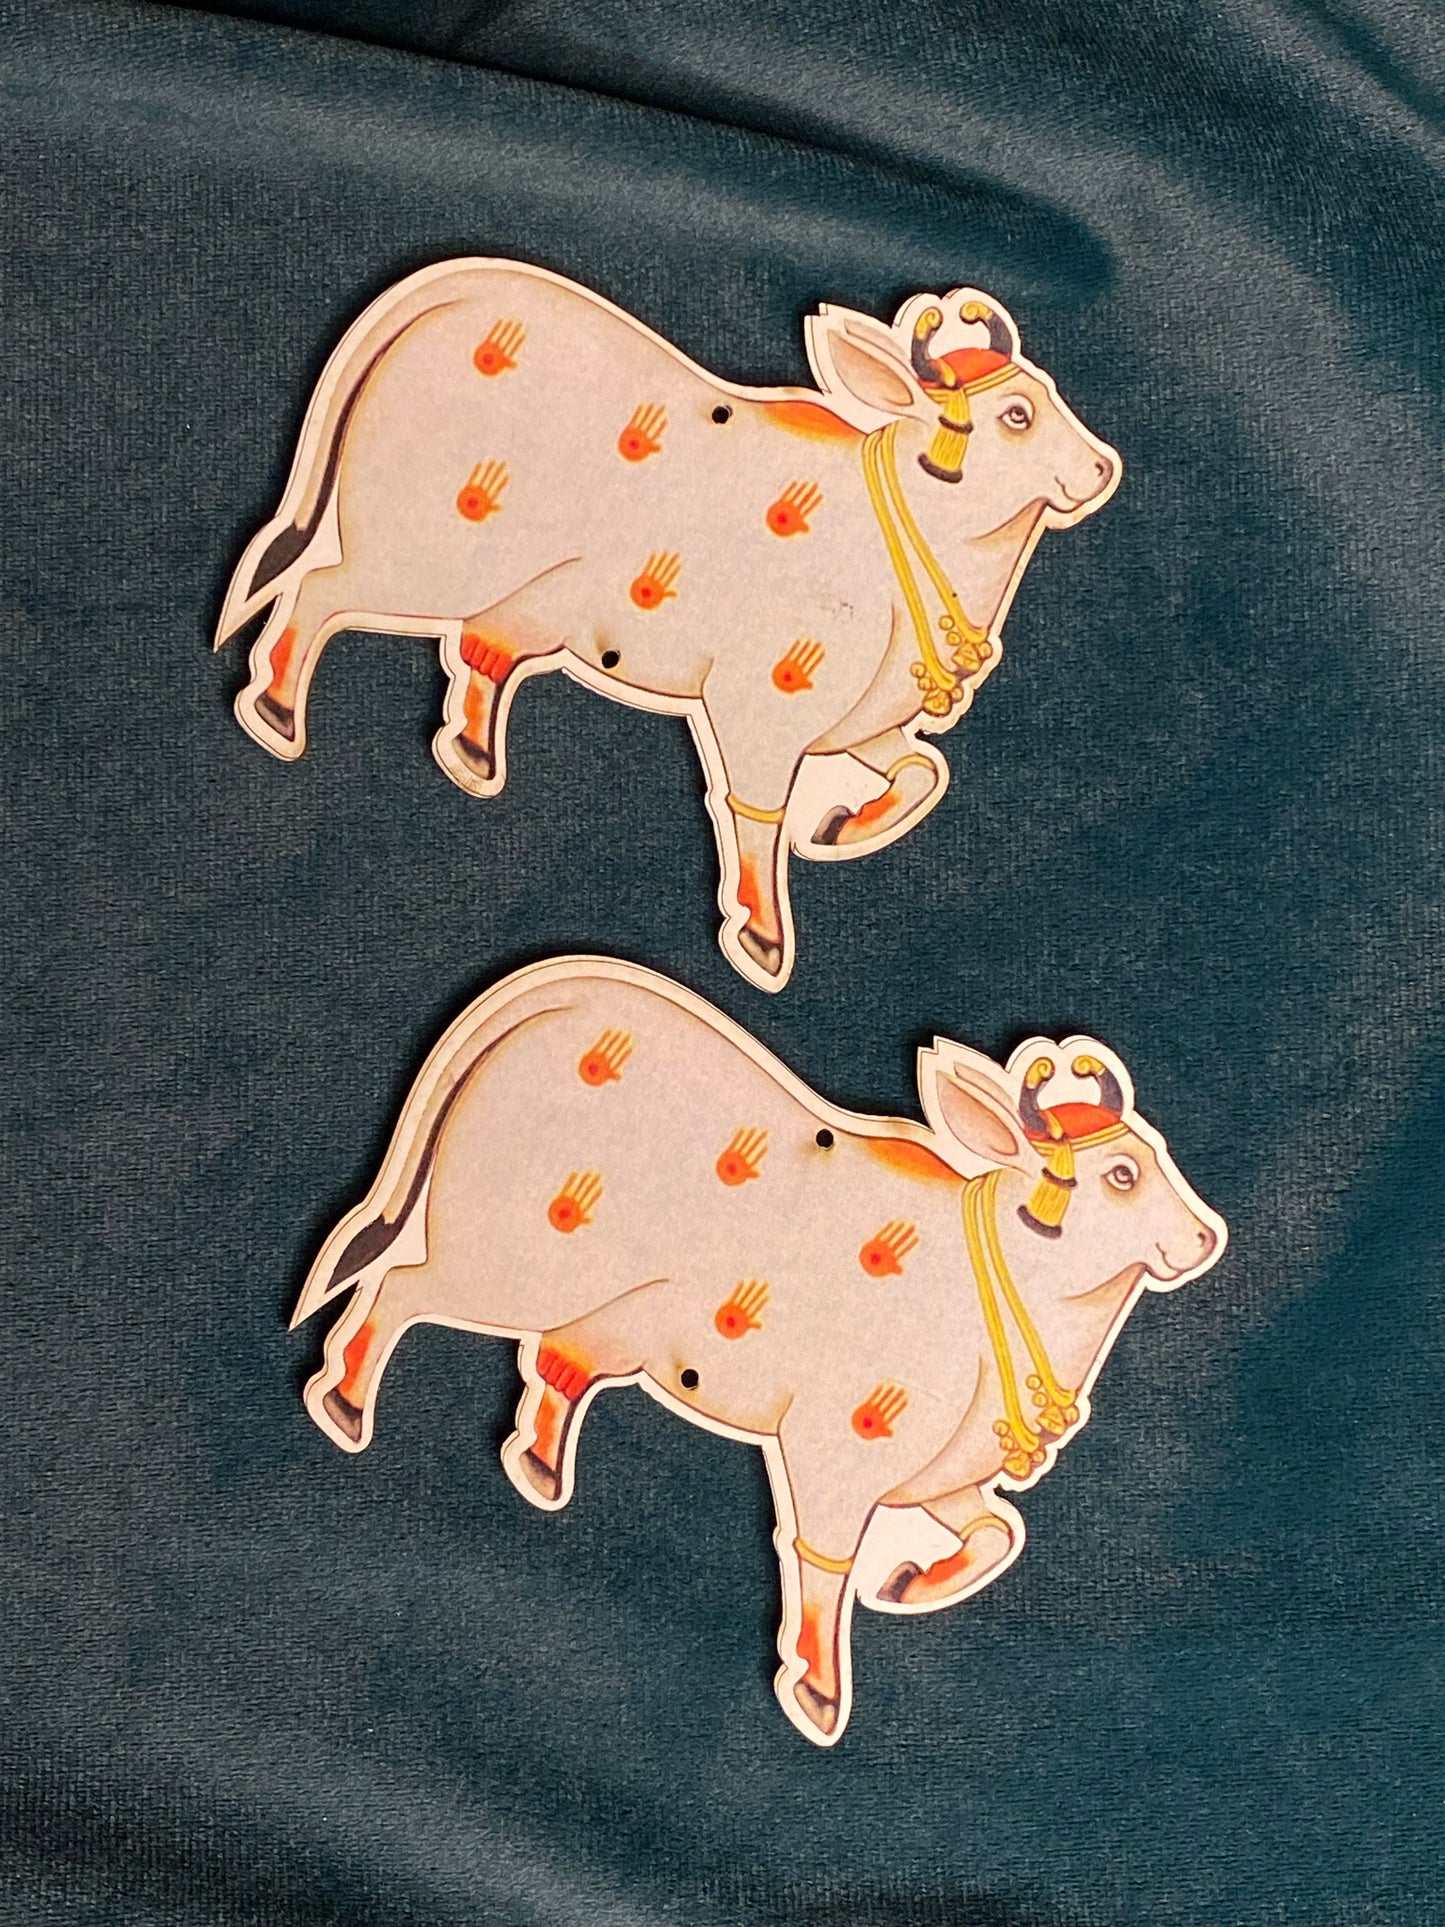 Cow PrInted MDF Cutout (SET OF 5)